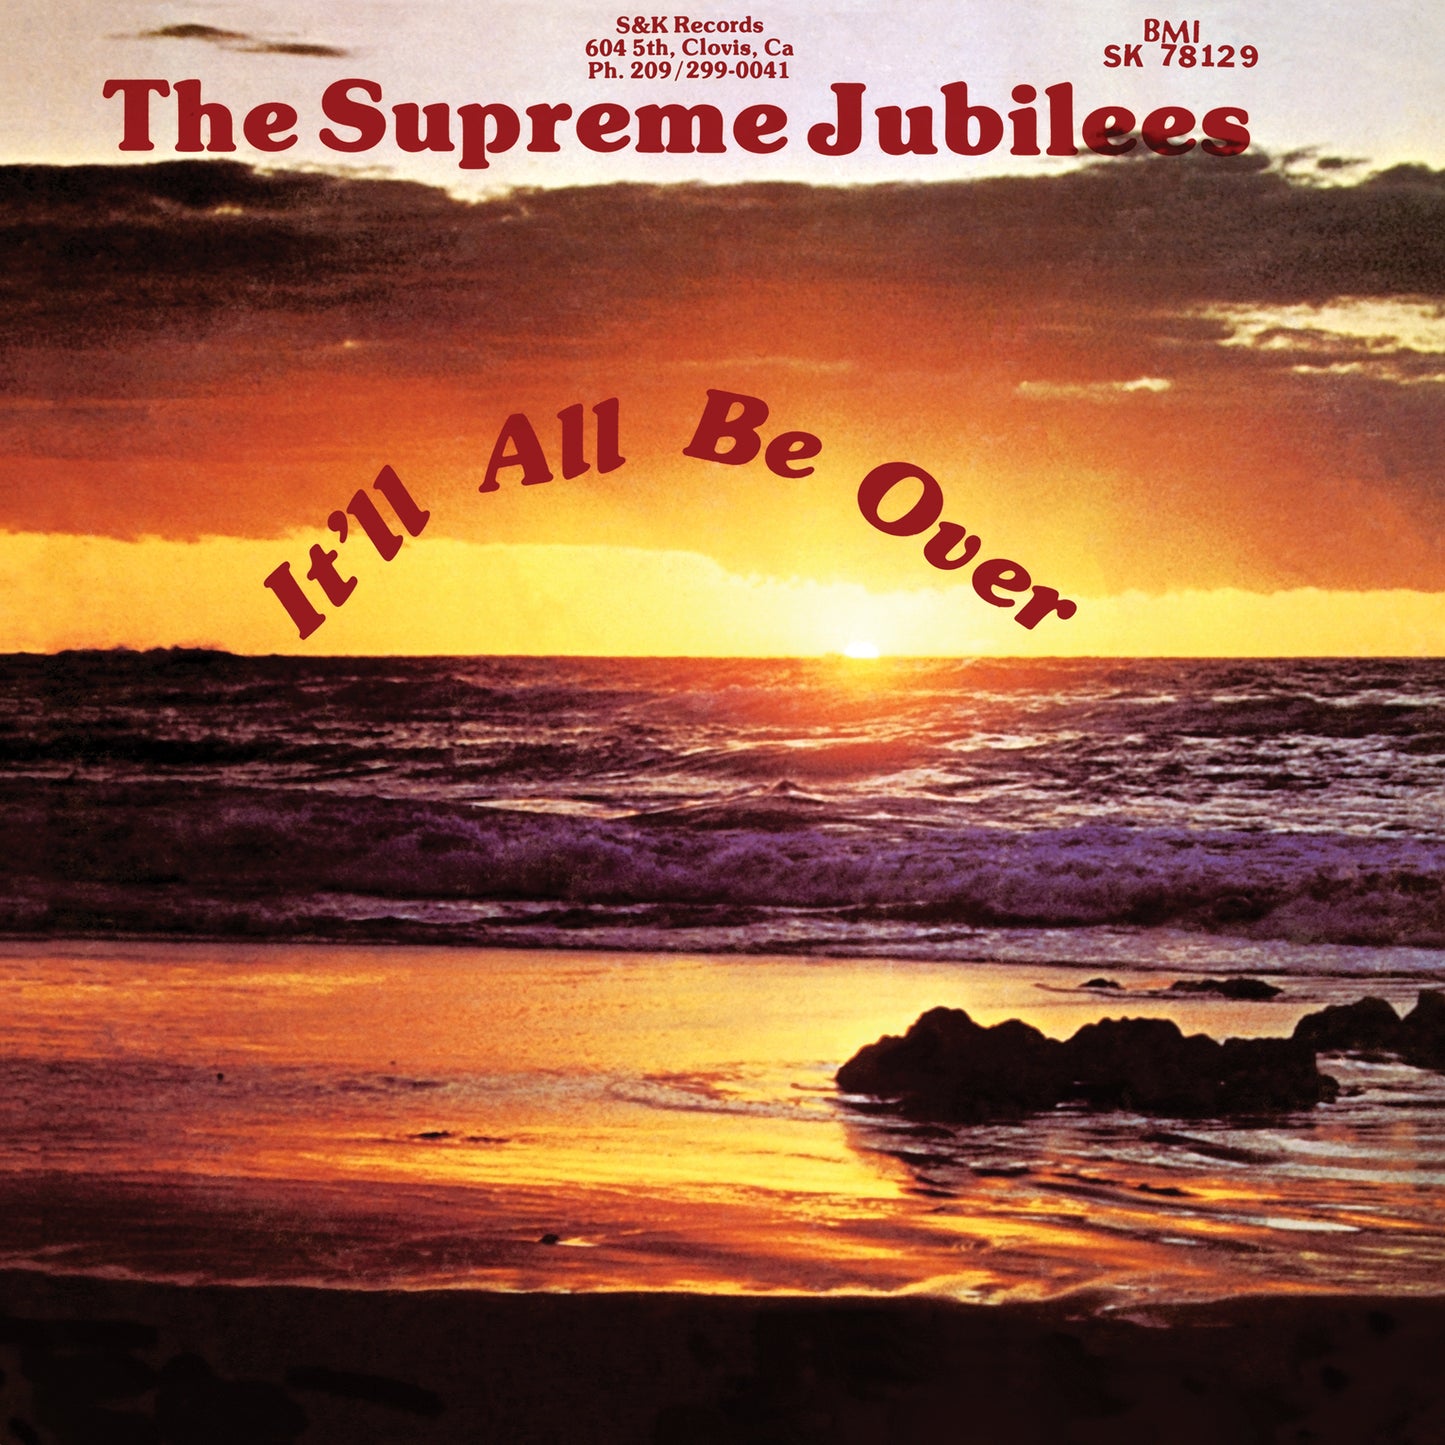 LITA120 - Supreme Jubilees - It'll All Be Over